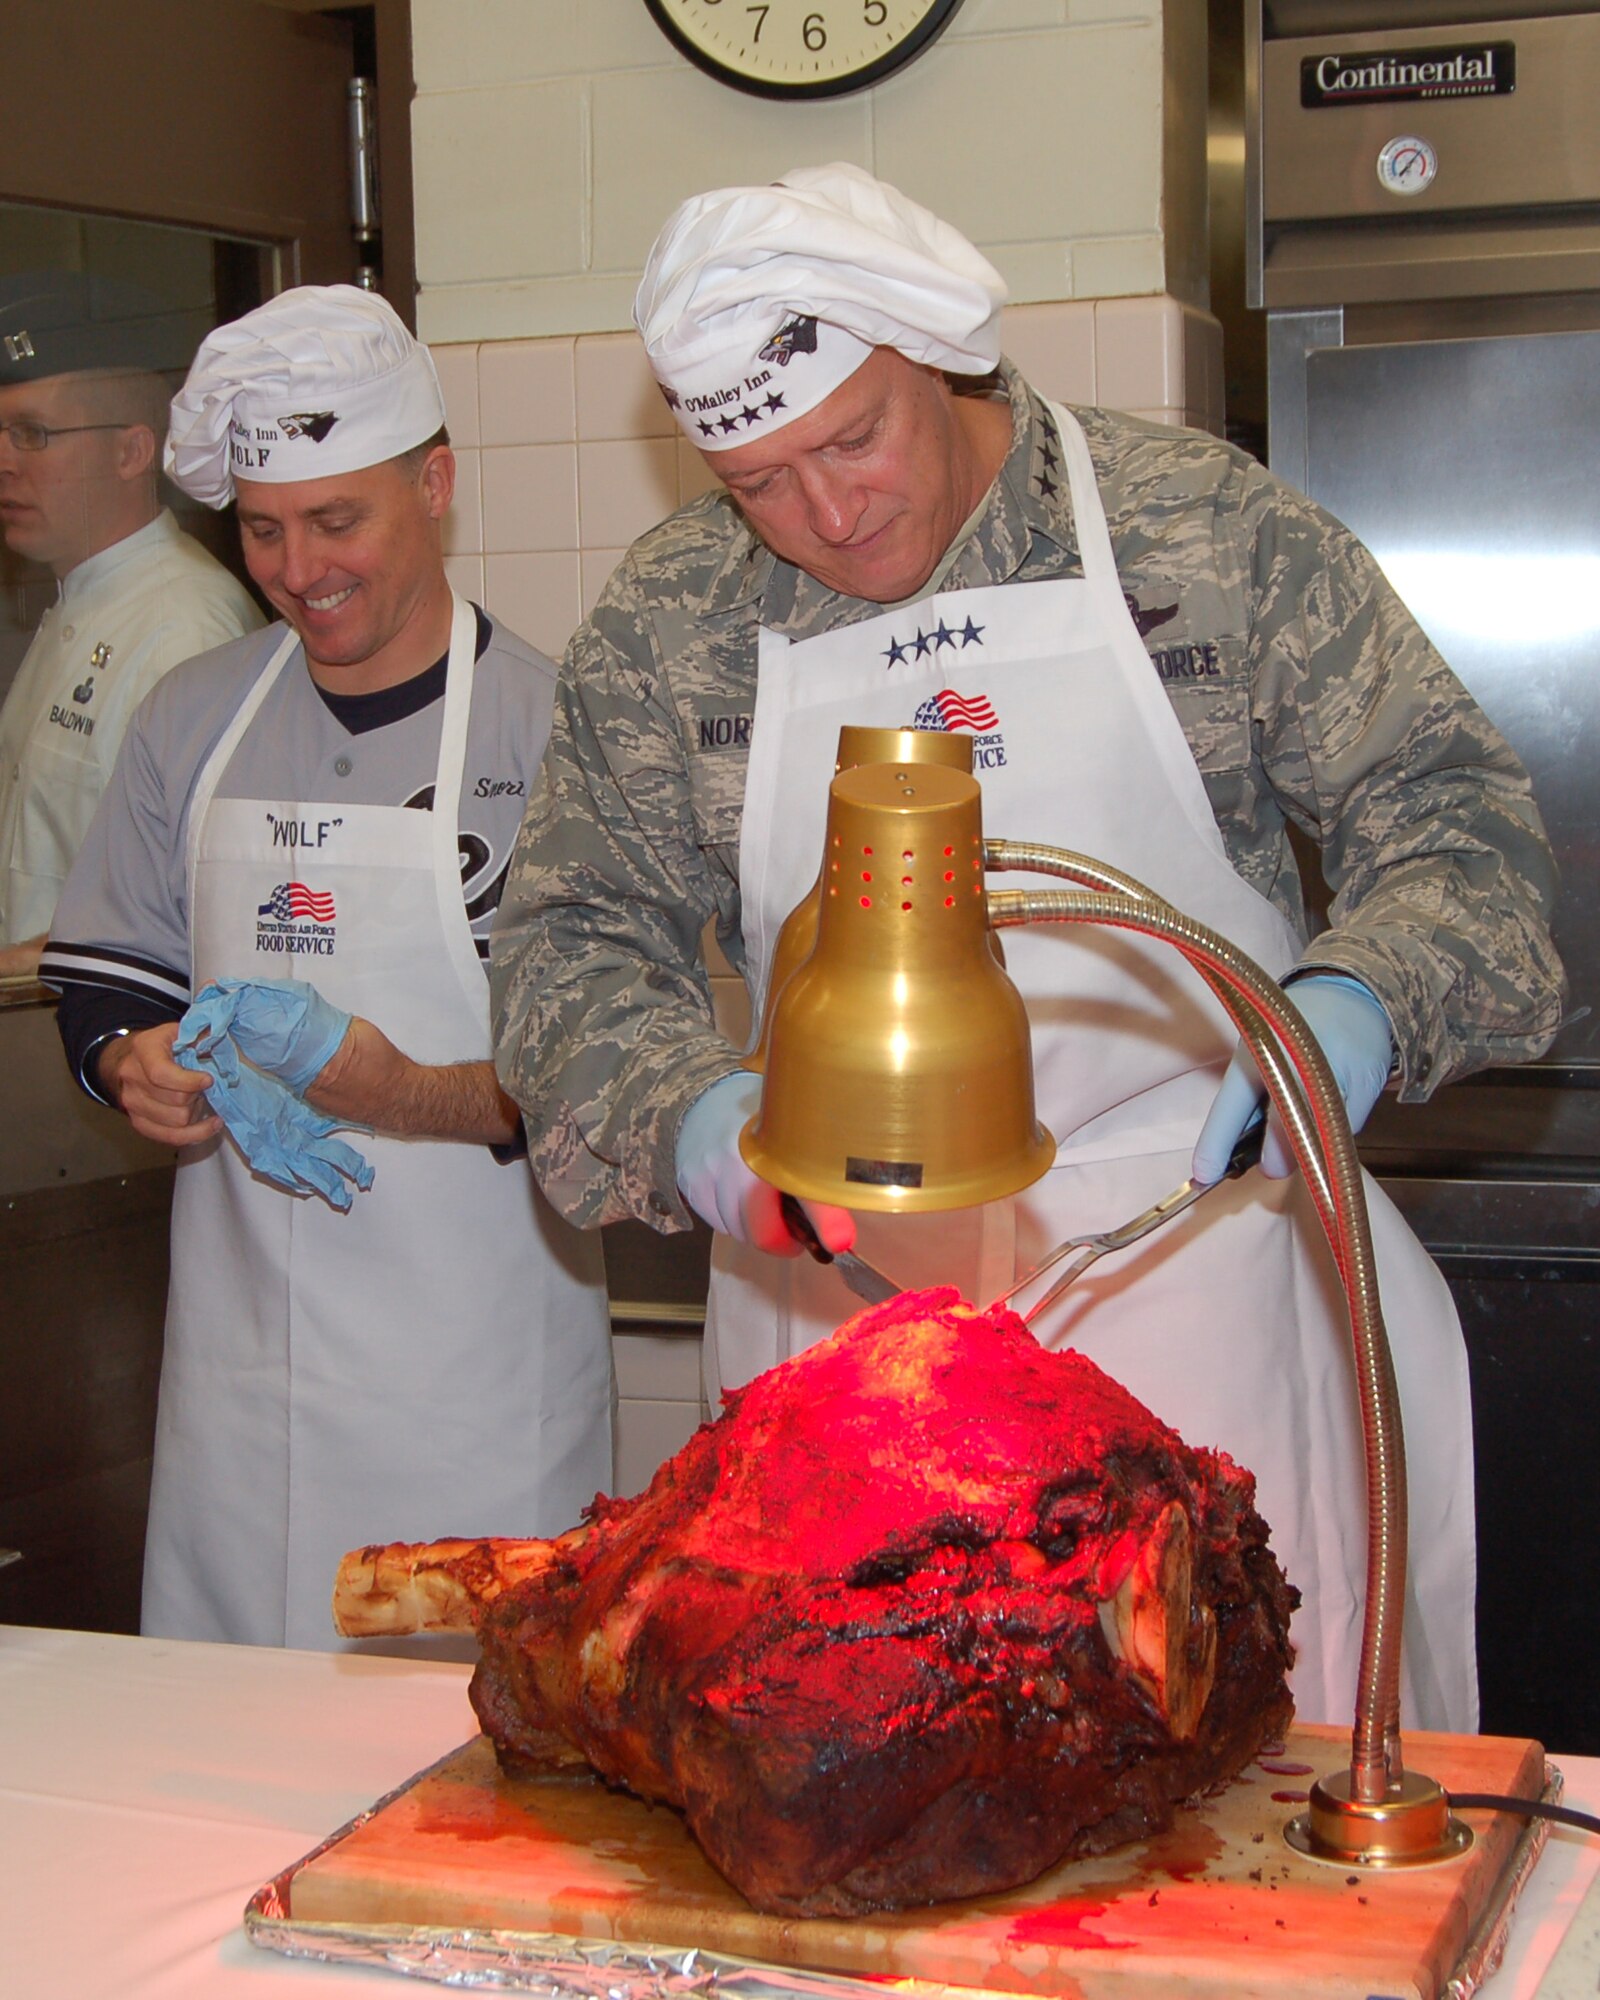 KUNSAN AIR BASE, Republic of Korea--Col. Robert Givens, 8th Fighter Wing commander, and Gen. Gary North, Pacific Air Forces commander, prepare to serve Thanksgiving dinner to Airmen at the O’Malley Dining Facility here 26 November.  Gen. North visited Kunsan with senior leaders from PACAF and the 7th Air Force and members of the PACAF Civilian Advisory Council to help serve the holiday meal and dine with Wolf Pack members.  Airmen serving at this remote assignment enjoyed a meal and conversation with leadership. (U.S. Air Force photo/Master Sgt. Anna Hayman)